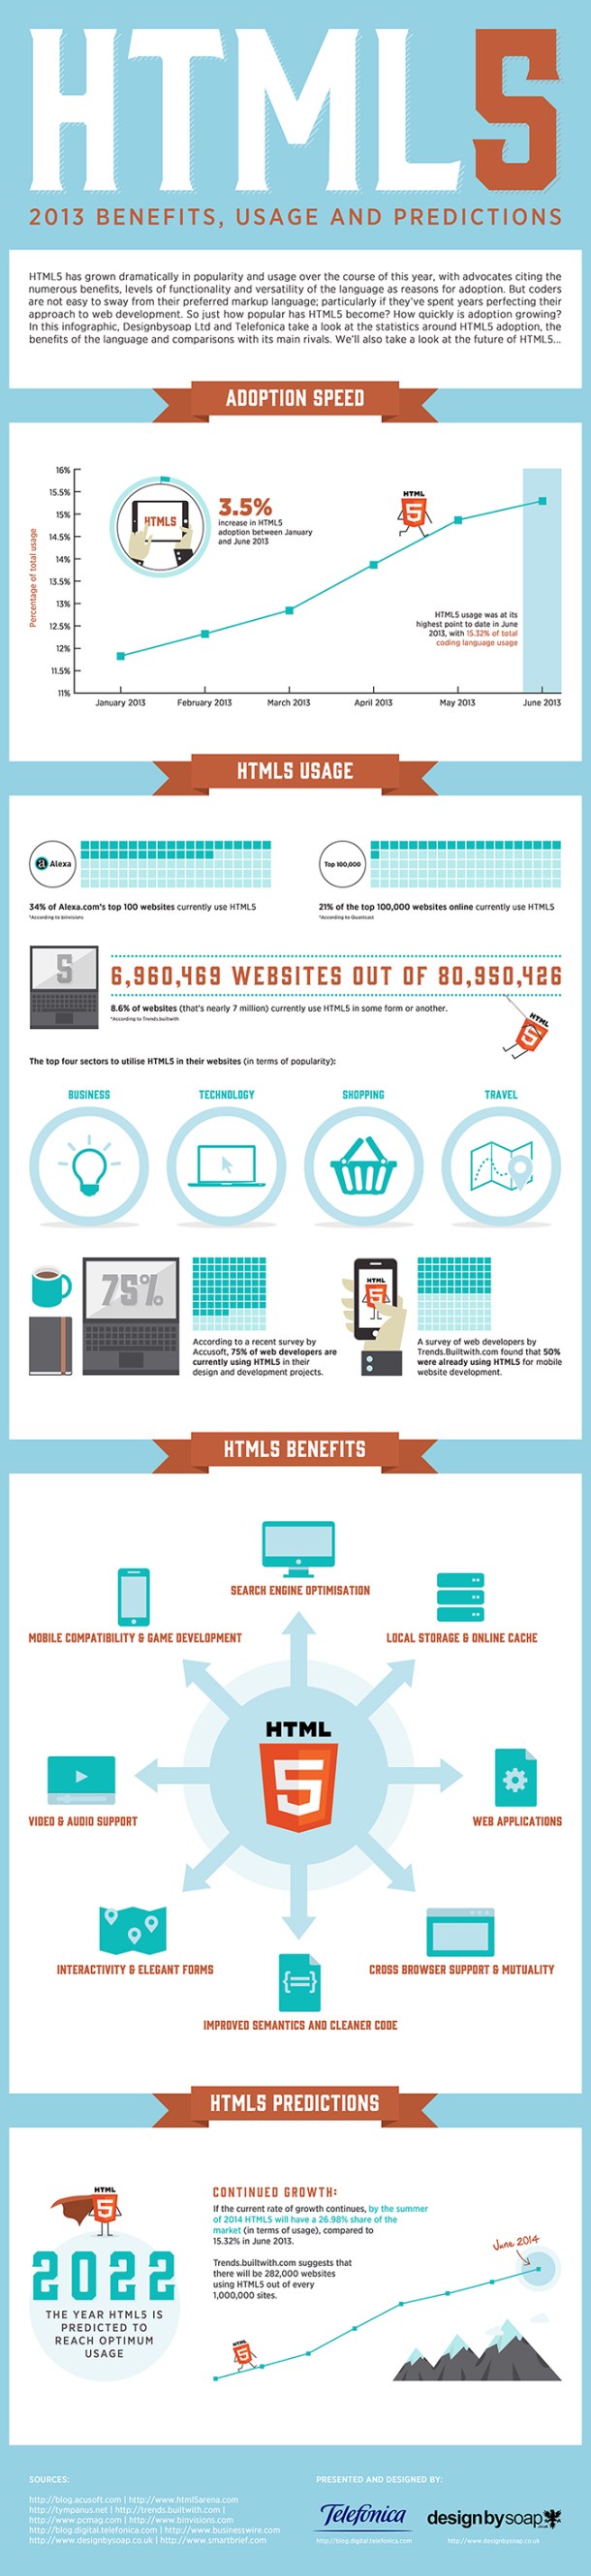 Infographic - the popularity of html5